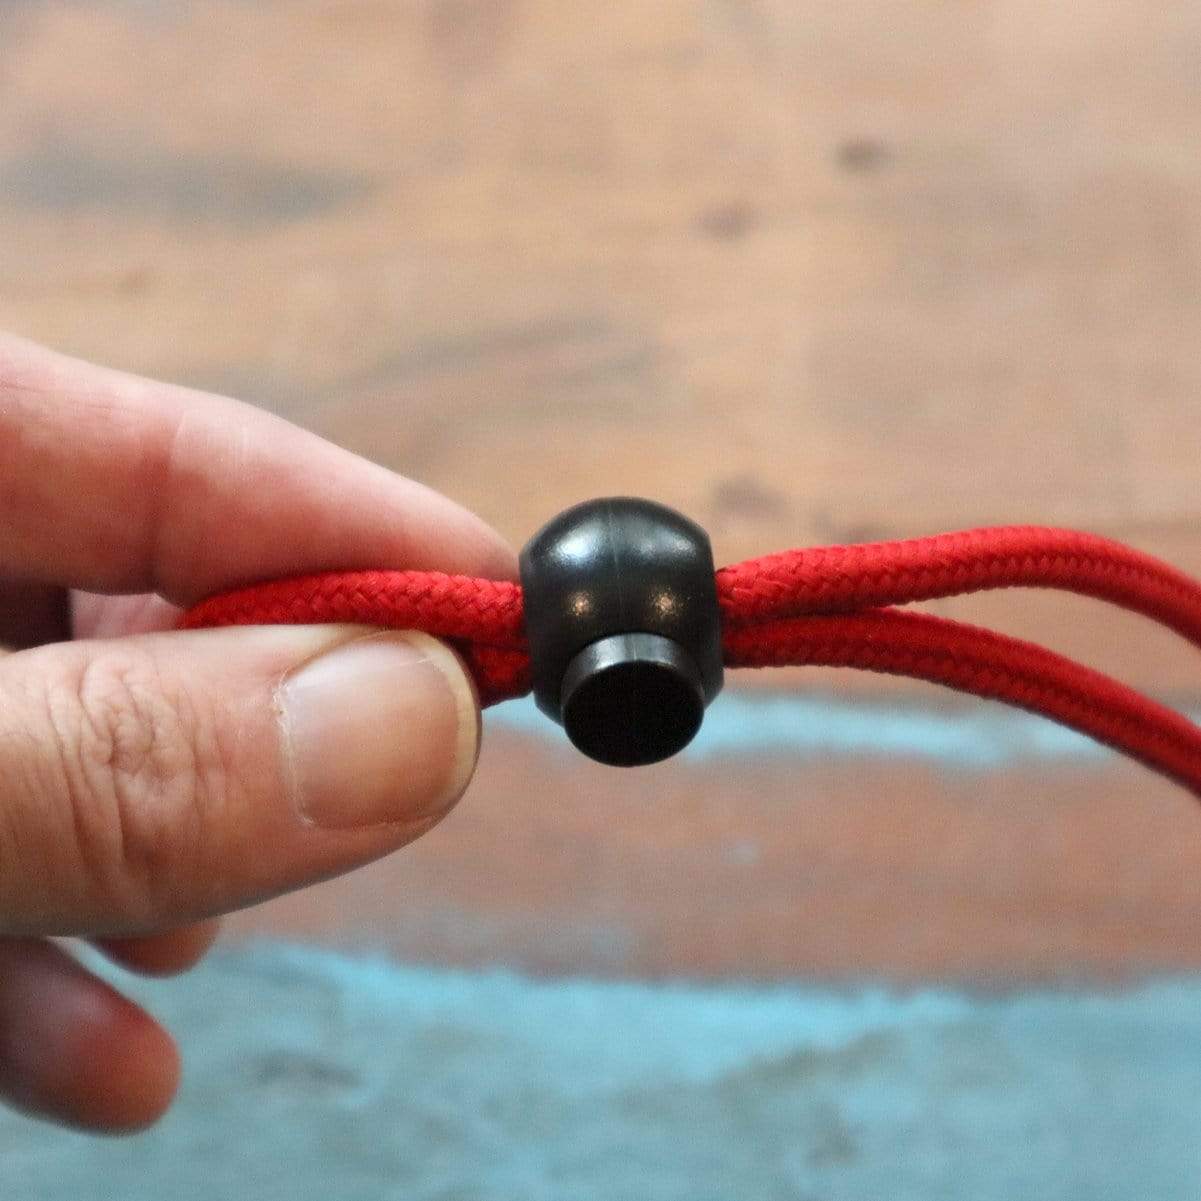 A hand holding an Adjustable Cord Lock - Round Ball Style - Single Hole End Toggle for DIY Projects (2135-4001) threaded through a black toggle fastener against a blurry background.